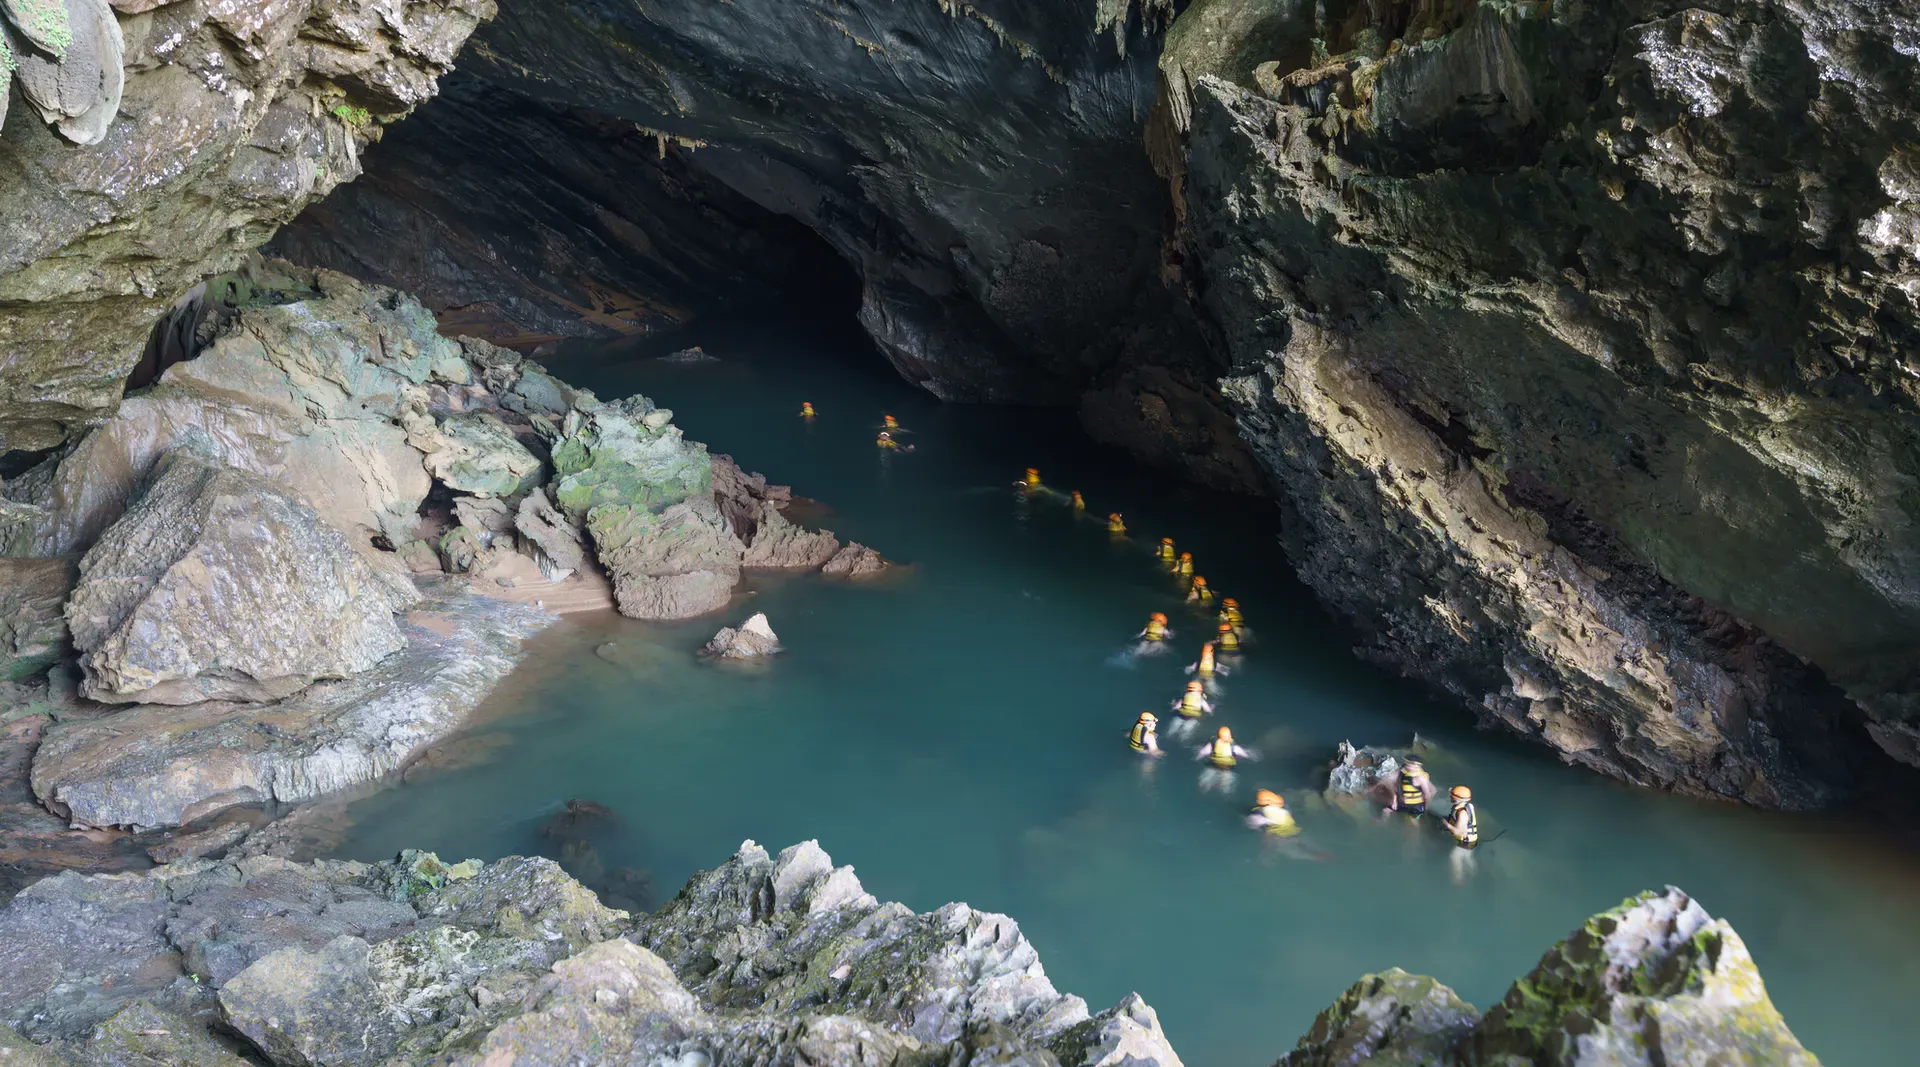 A string of people swimming into the dramatic Tra Ang Cave, Vietnam